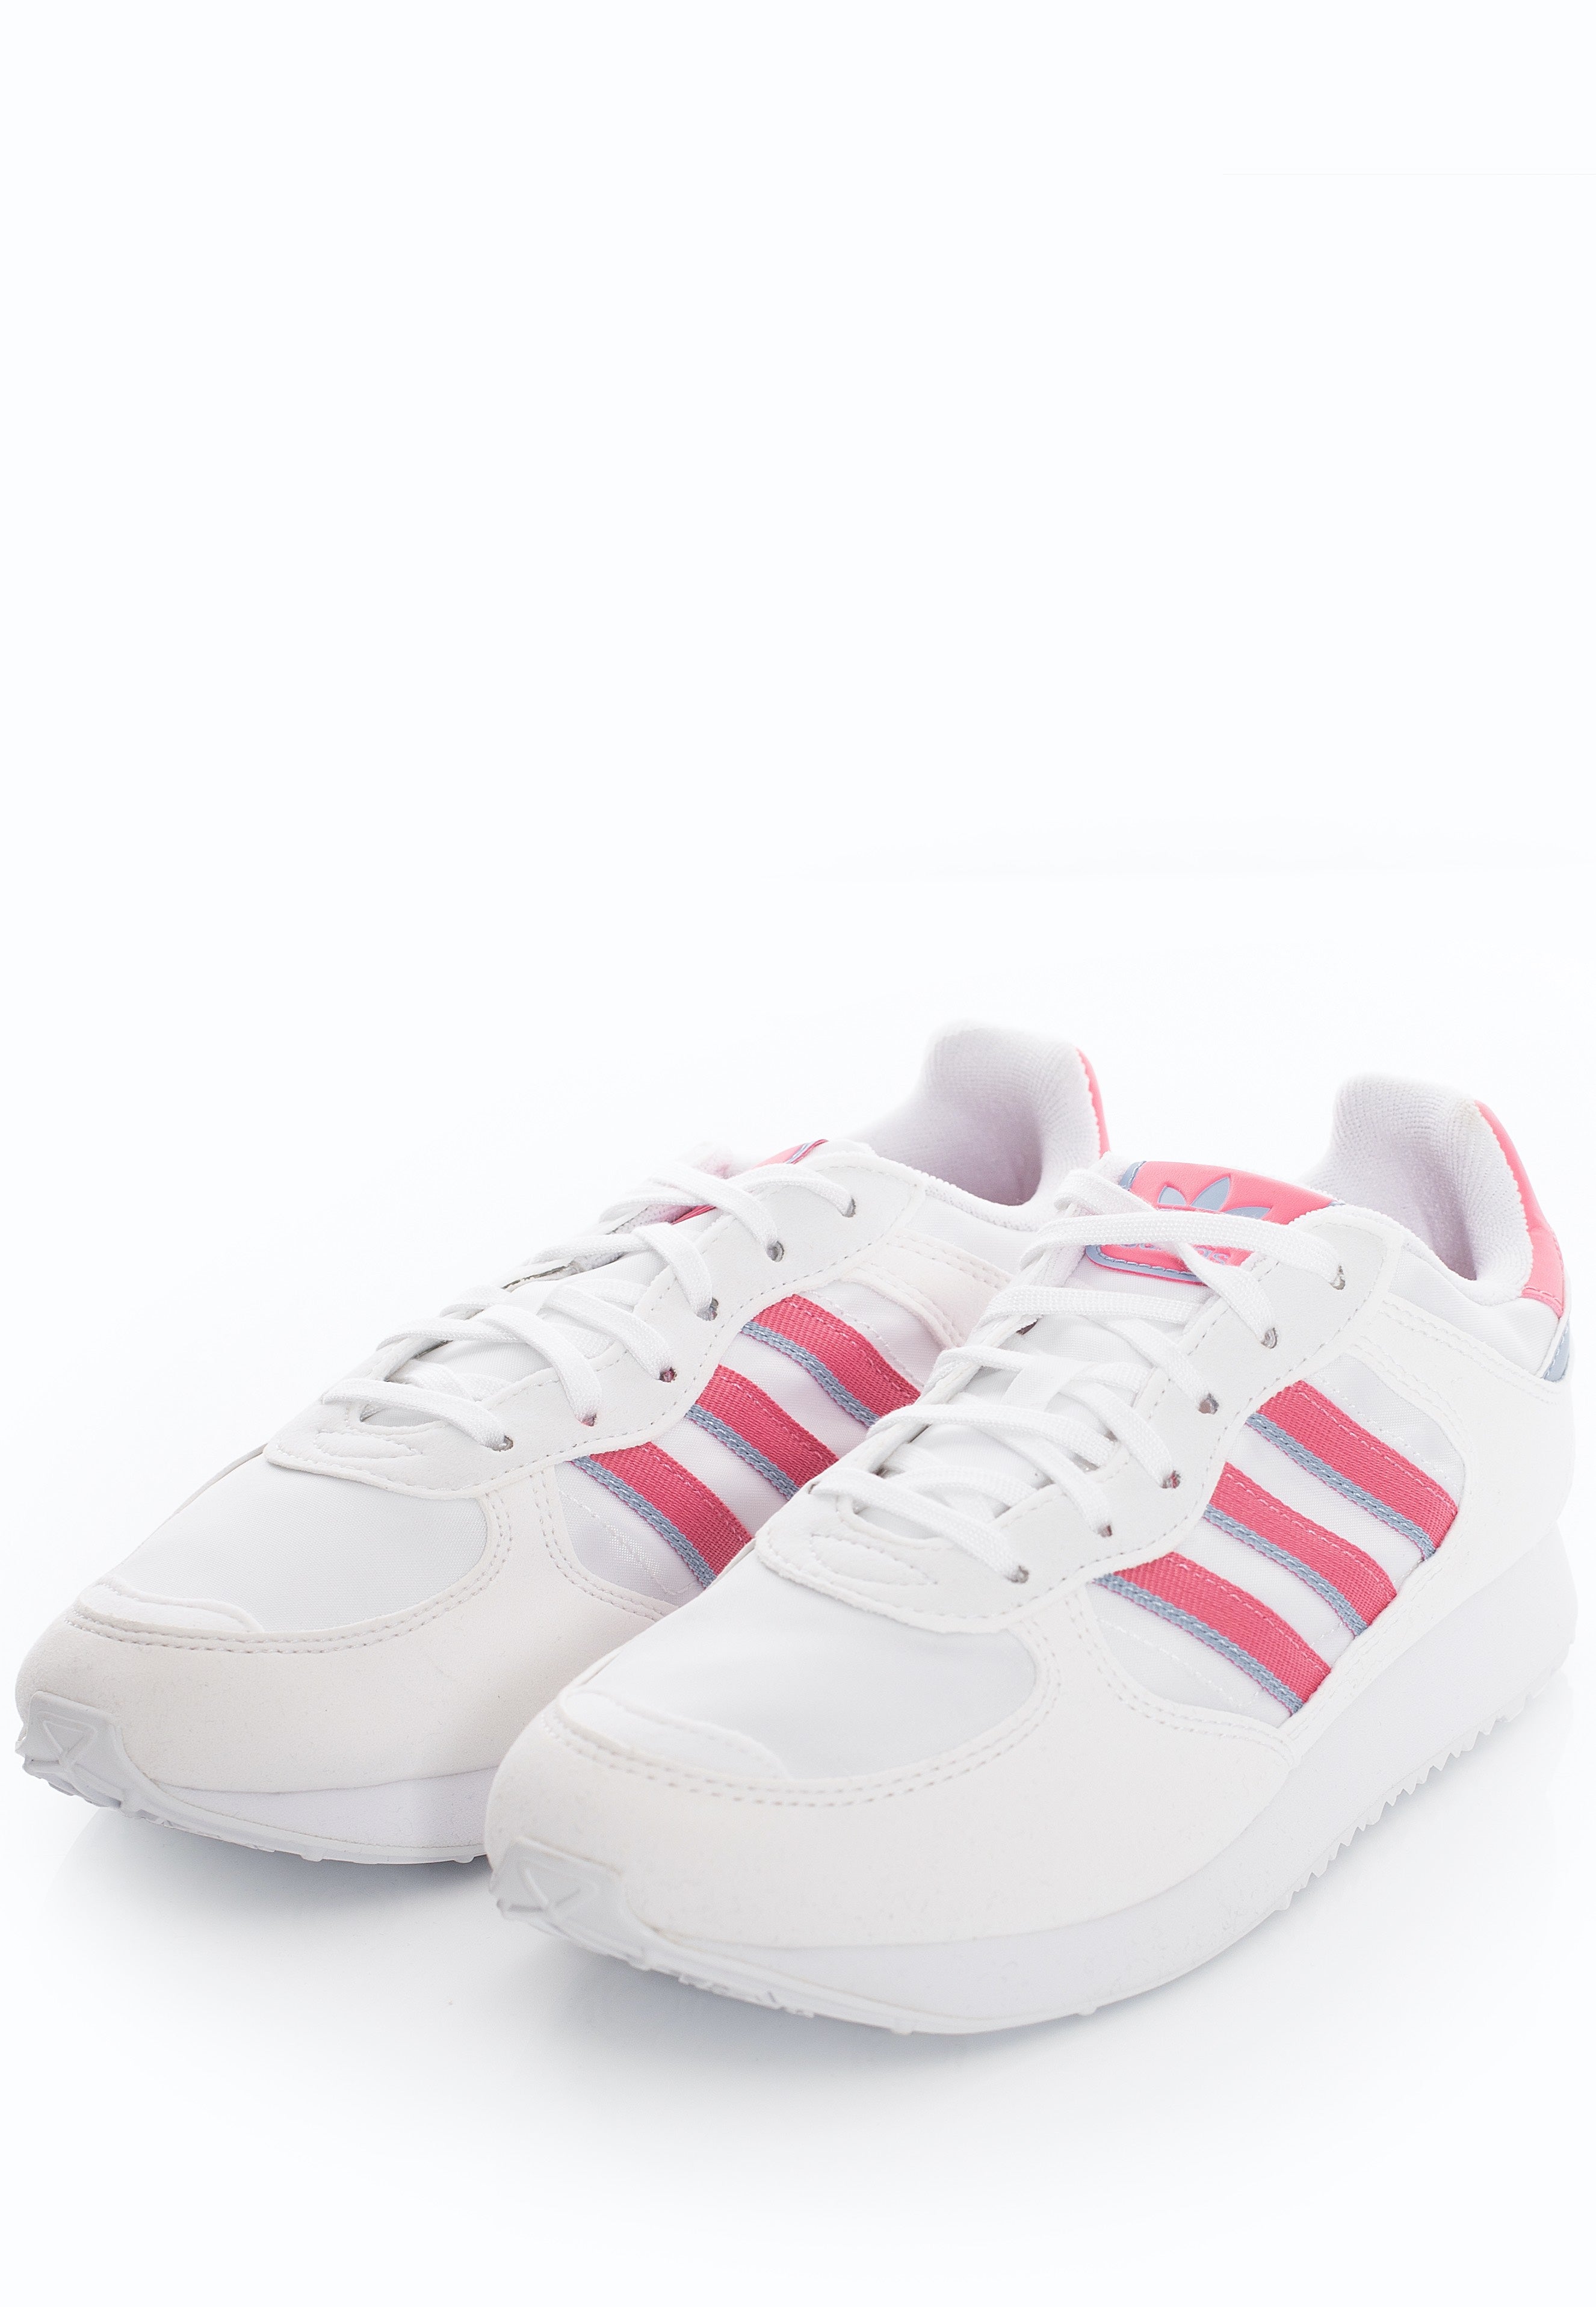 Adidas - Special 21 W Ftwwht/Roston/Ambsky - Girl Shoes | Women-Image